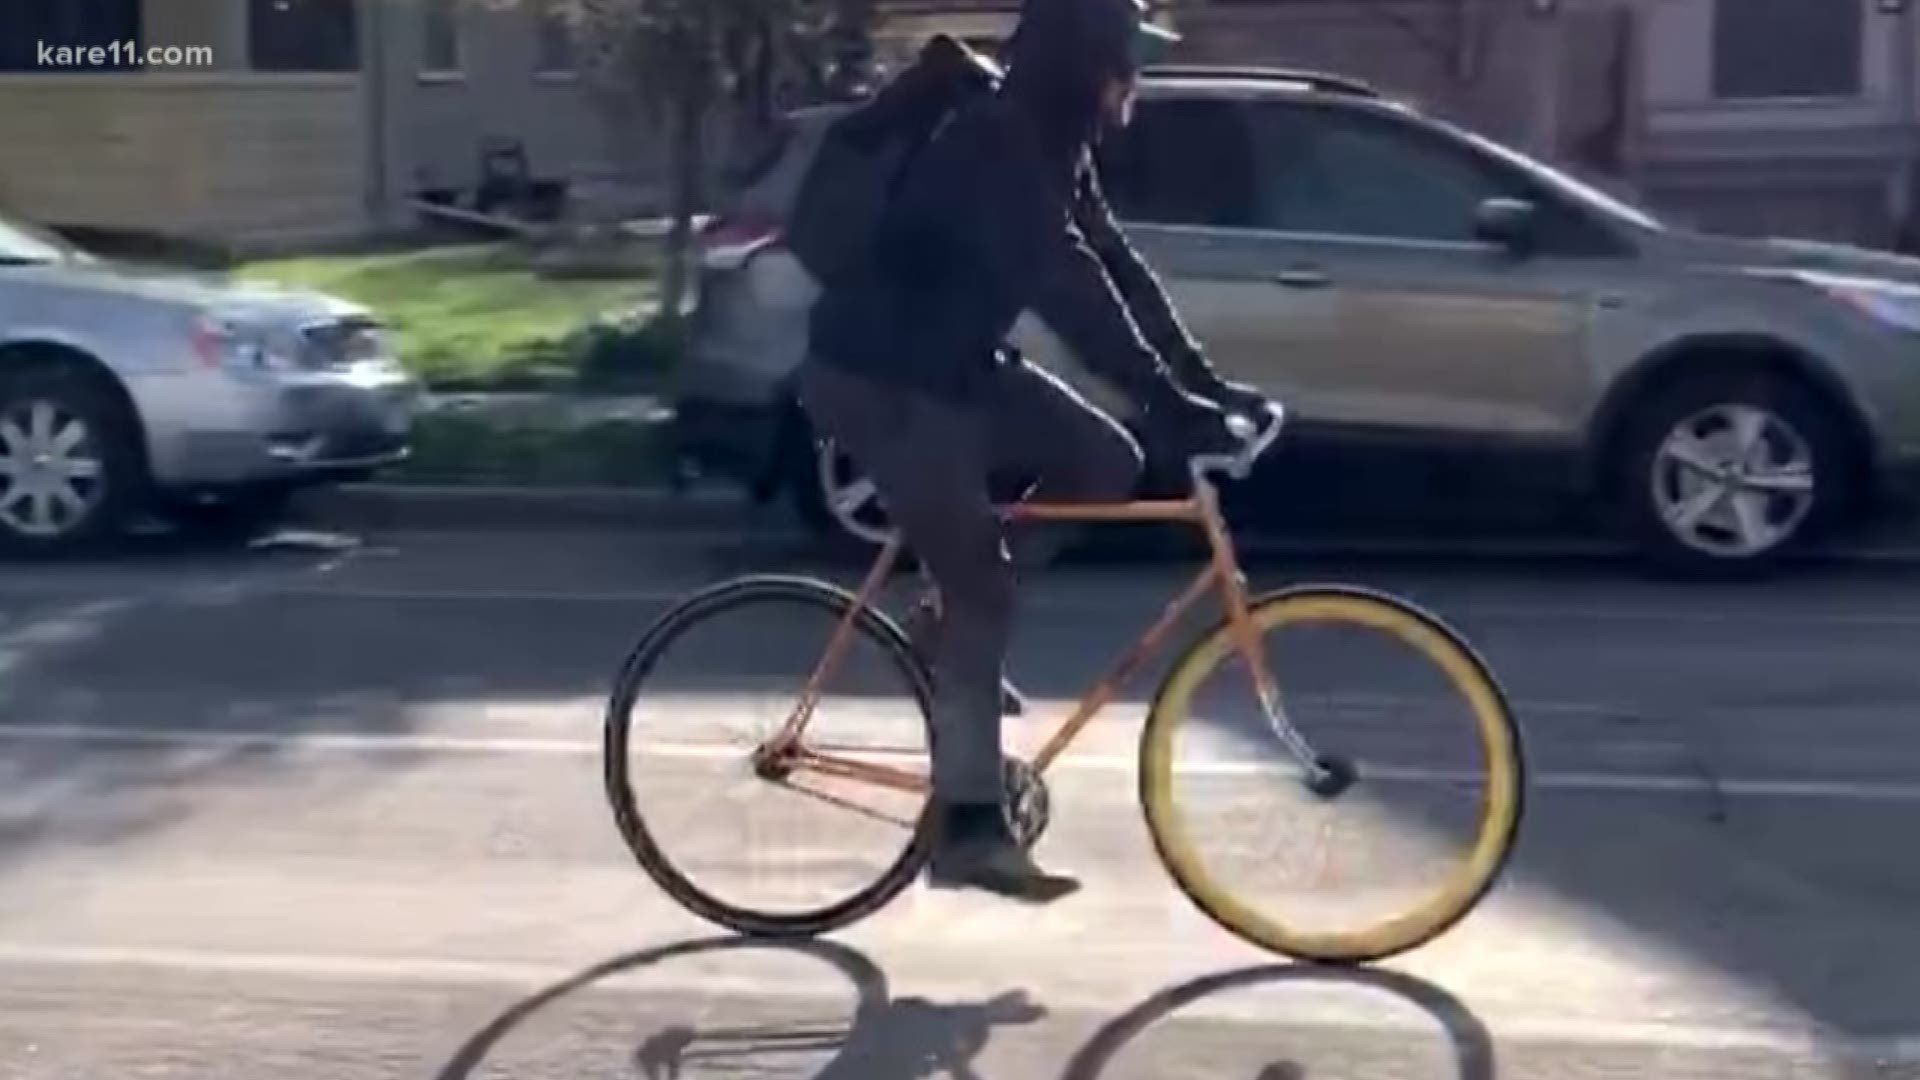 Minneapolis police say bicyclist in this latest case could be a "copycat."